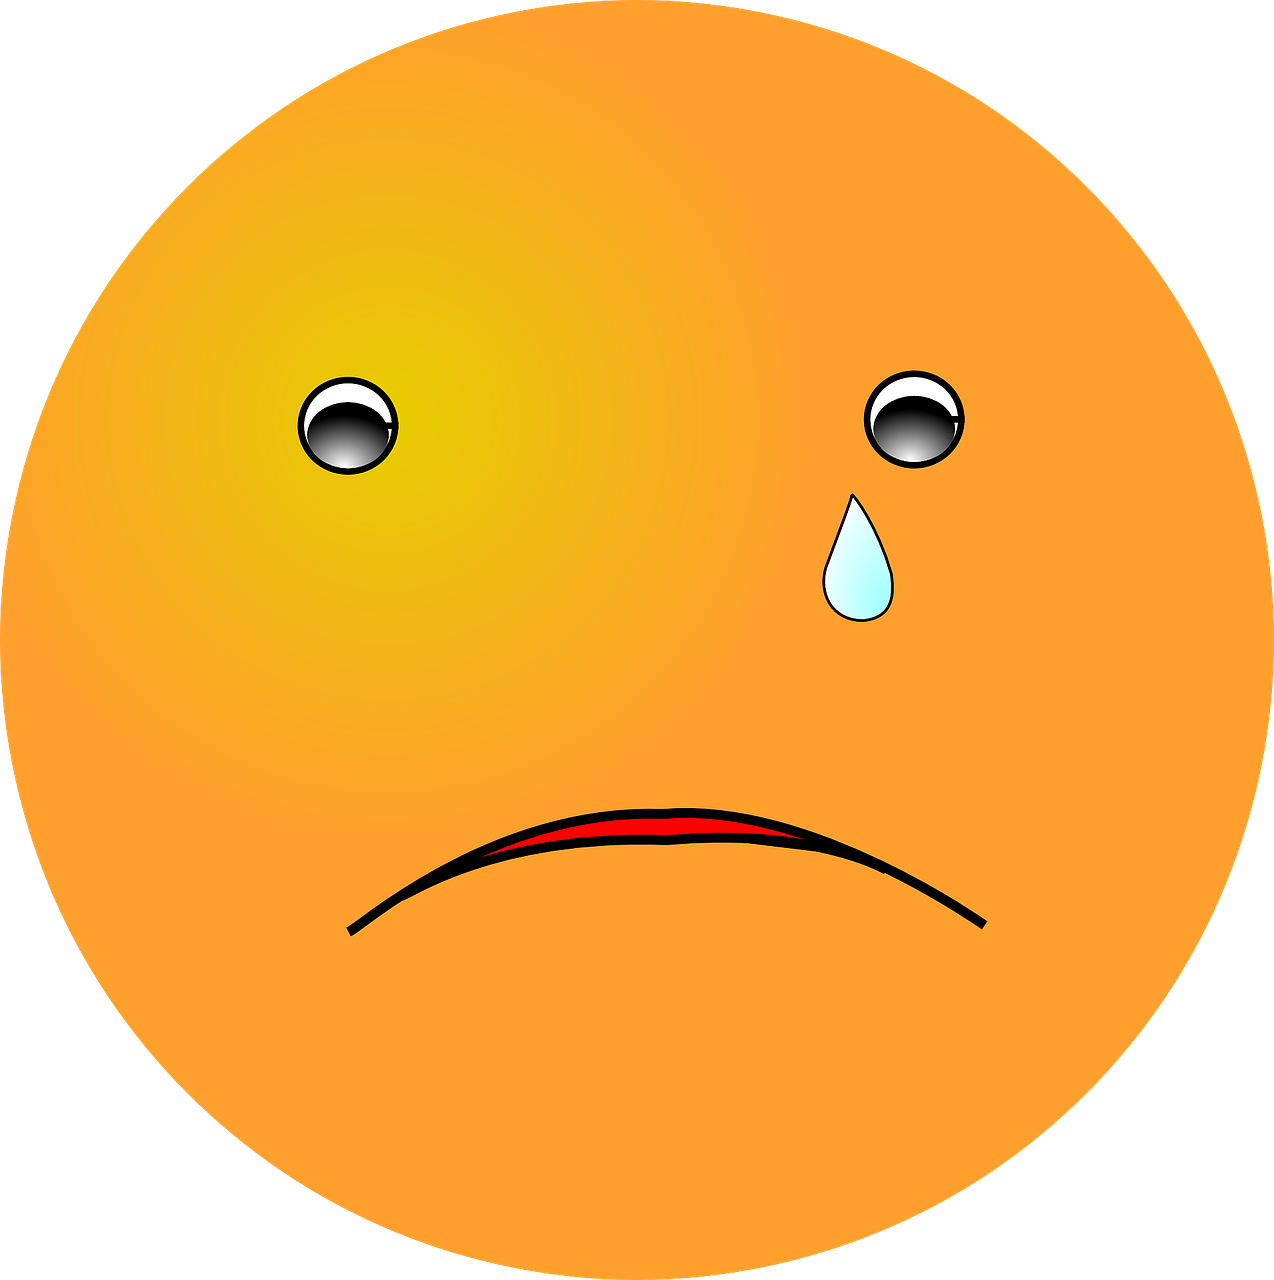 a sad face with a tear coming out of it, a cartoon, orange, round gentle face, lonely and sad, face picture